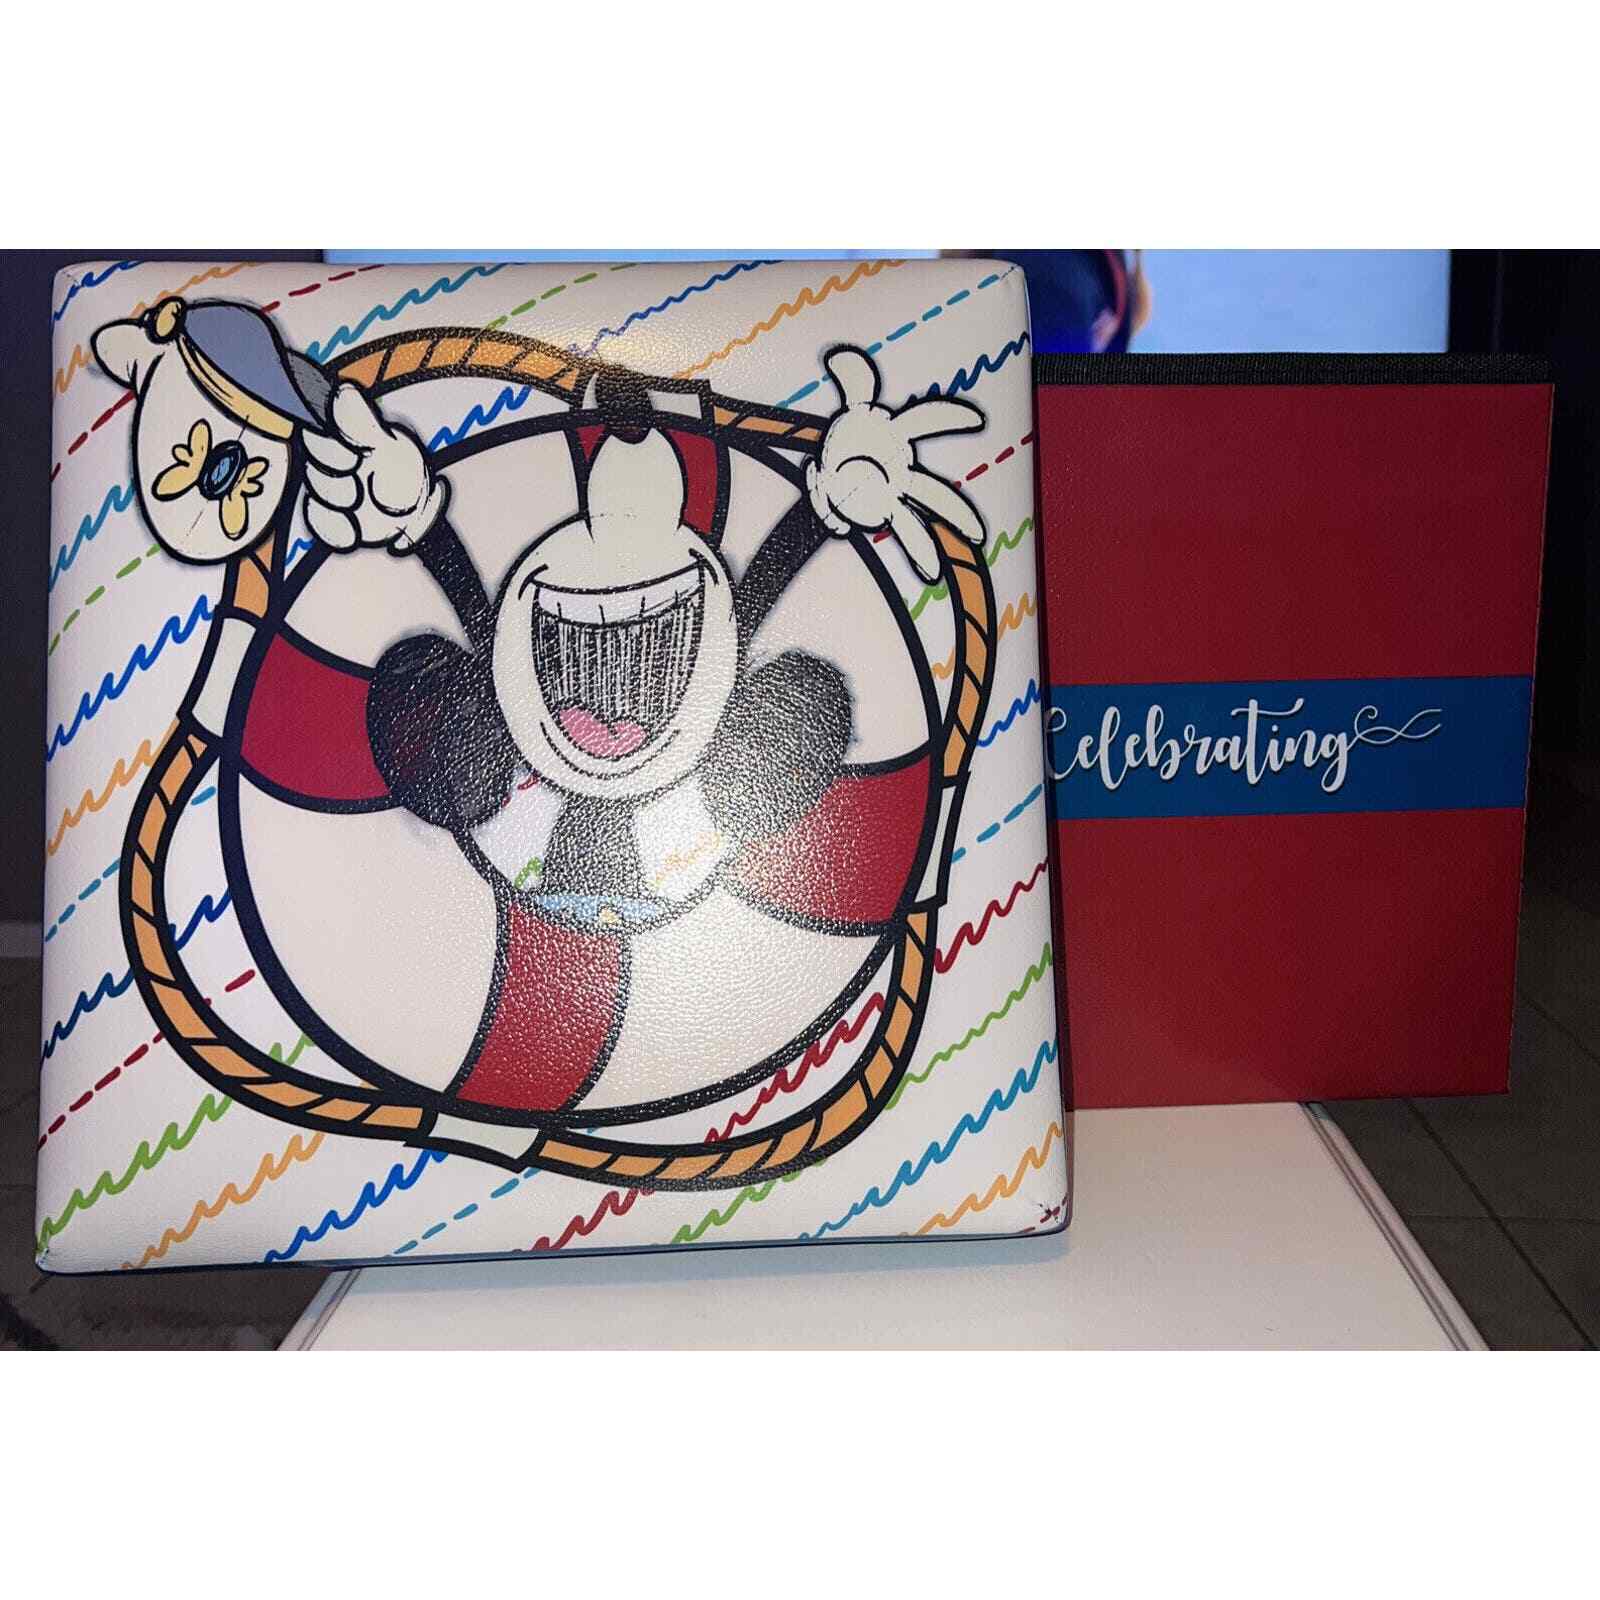 Vintage Disney Cruise Mickey Celebrate B’Day Storage box in excellent condition.